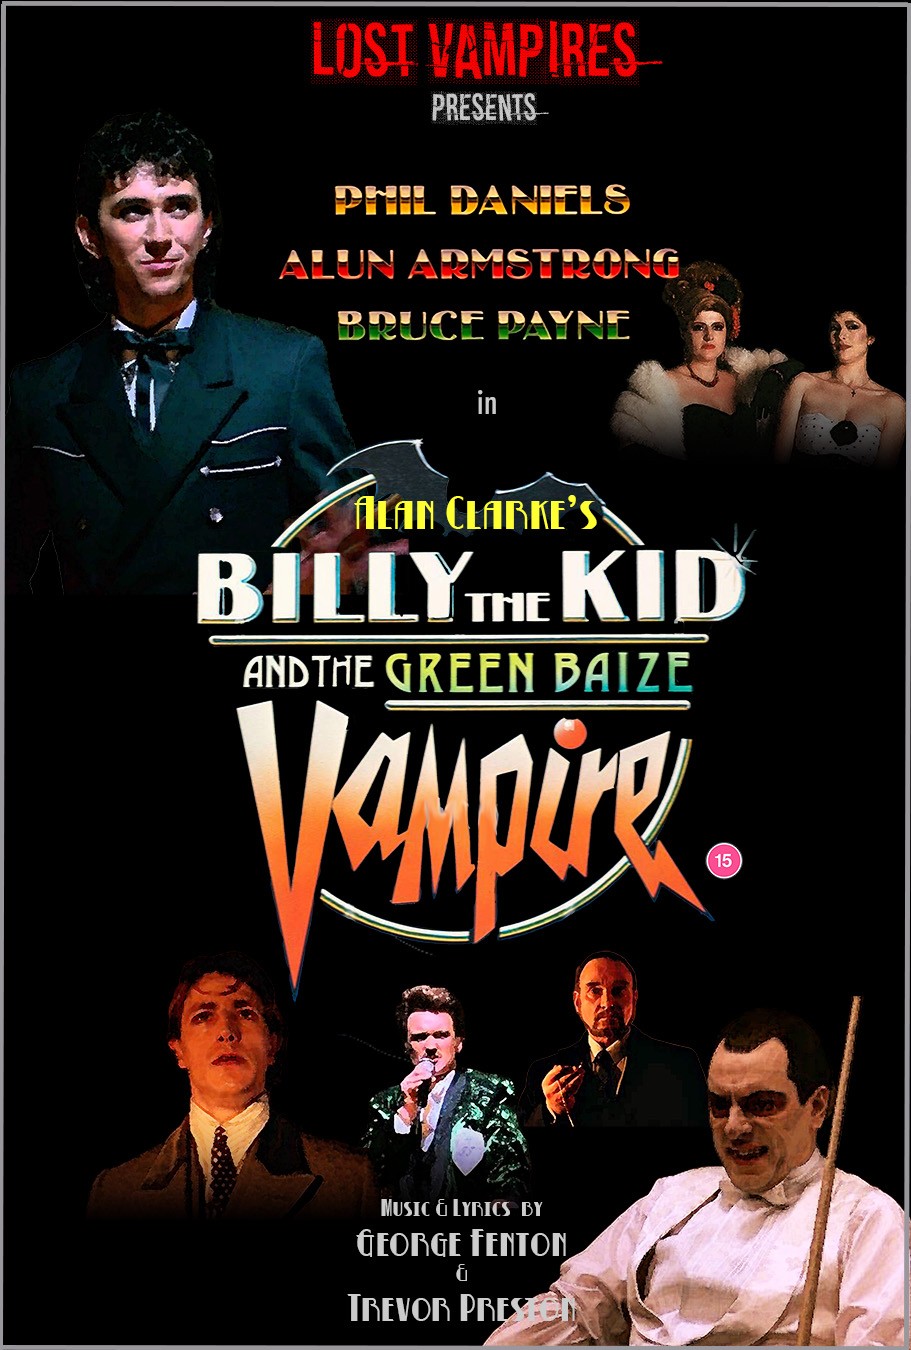 BILLY THE KID AND THE GREEN BAIZE VAMPIRE - presented by Lost Vampires